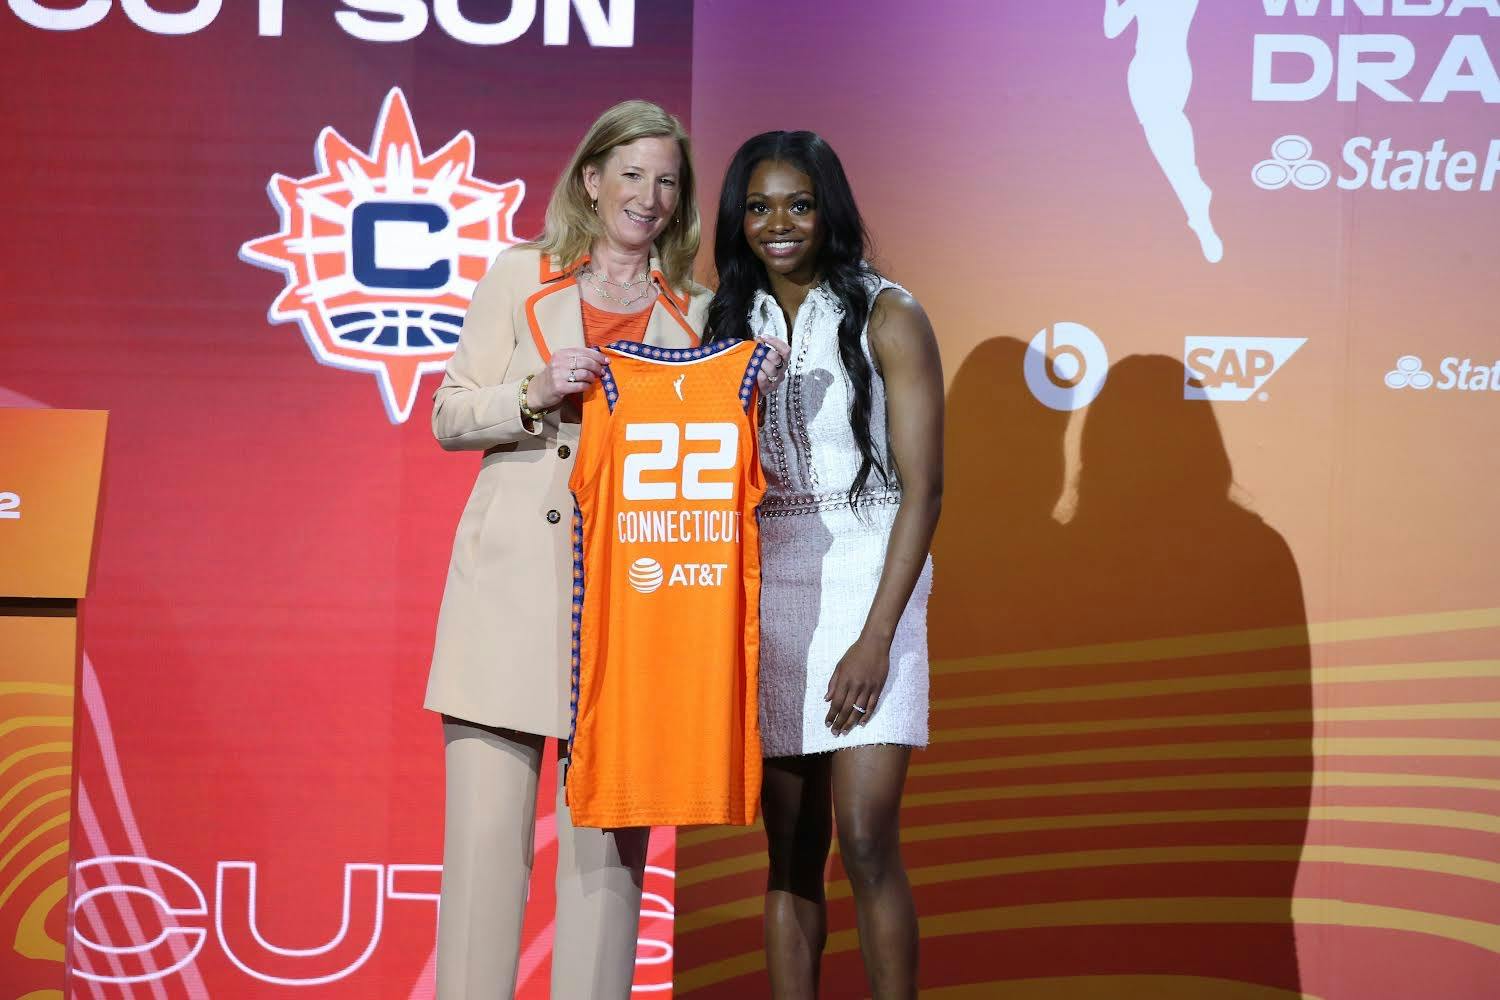 <p>NEW YORK, NY - APRIL 11: Nia Clouden is selected twelfth overall by the Connecticut Sun during the 2022 WNBA Draft on April 11, 2022 at Spring Studios in New York, New York. Copyright 2022 NBAE (Photo by Michelle Farsi/NBAE via Getty Images)</p>